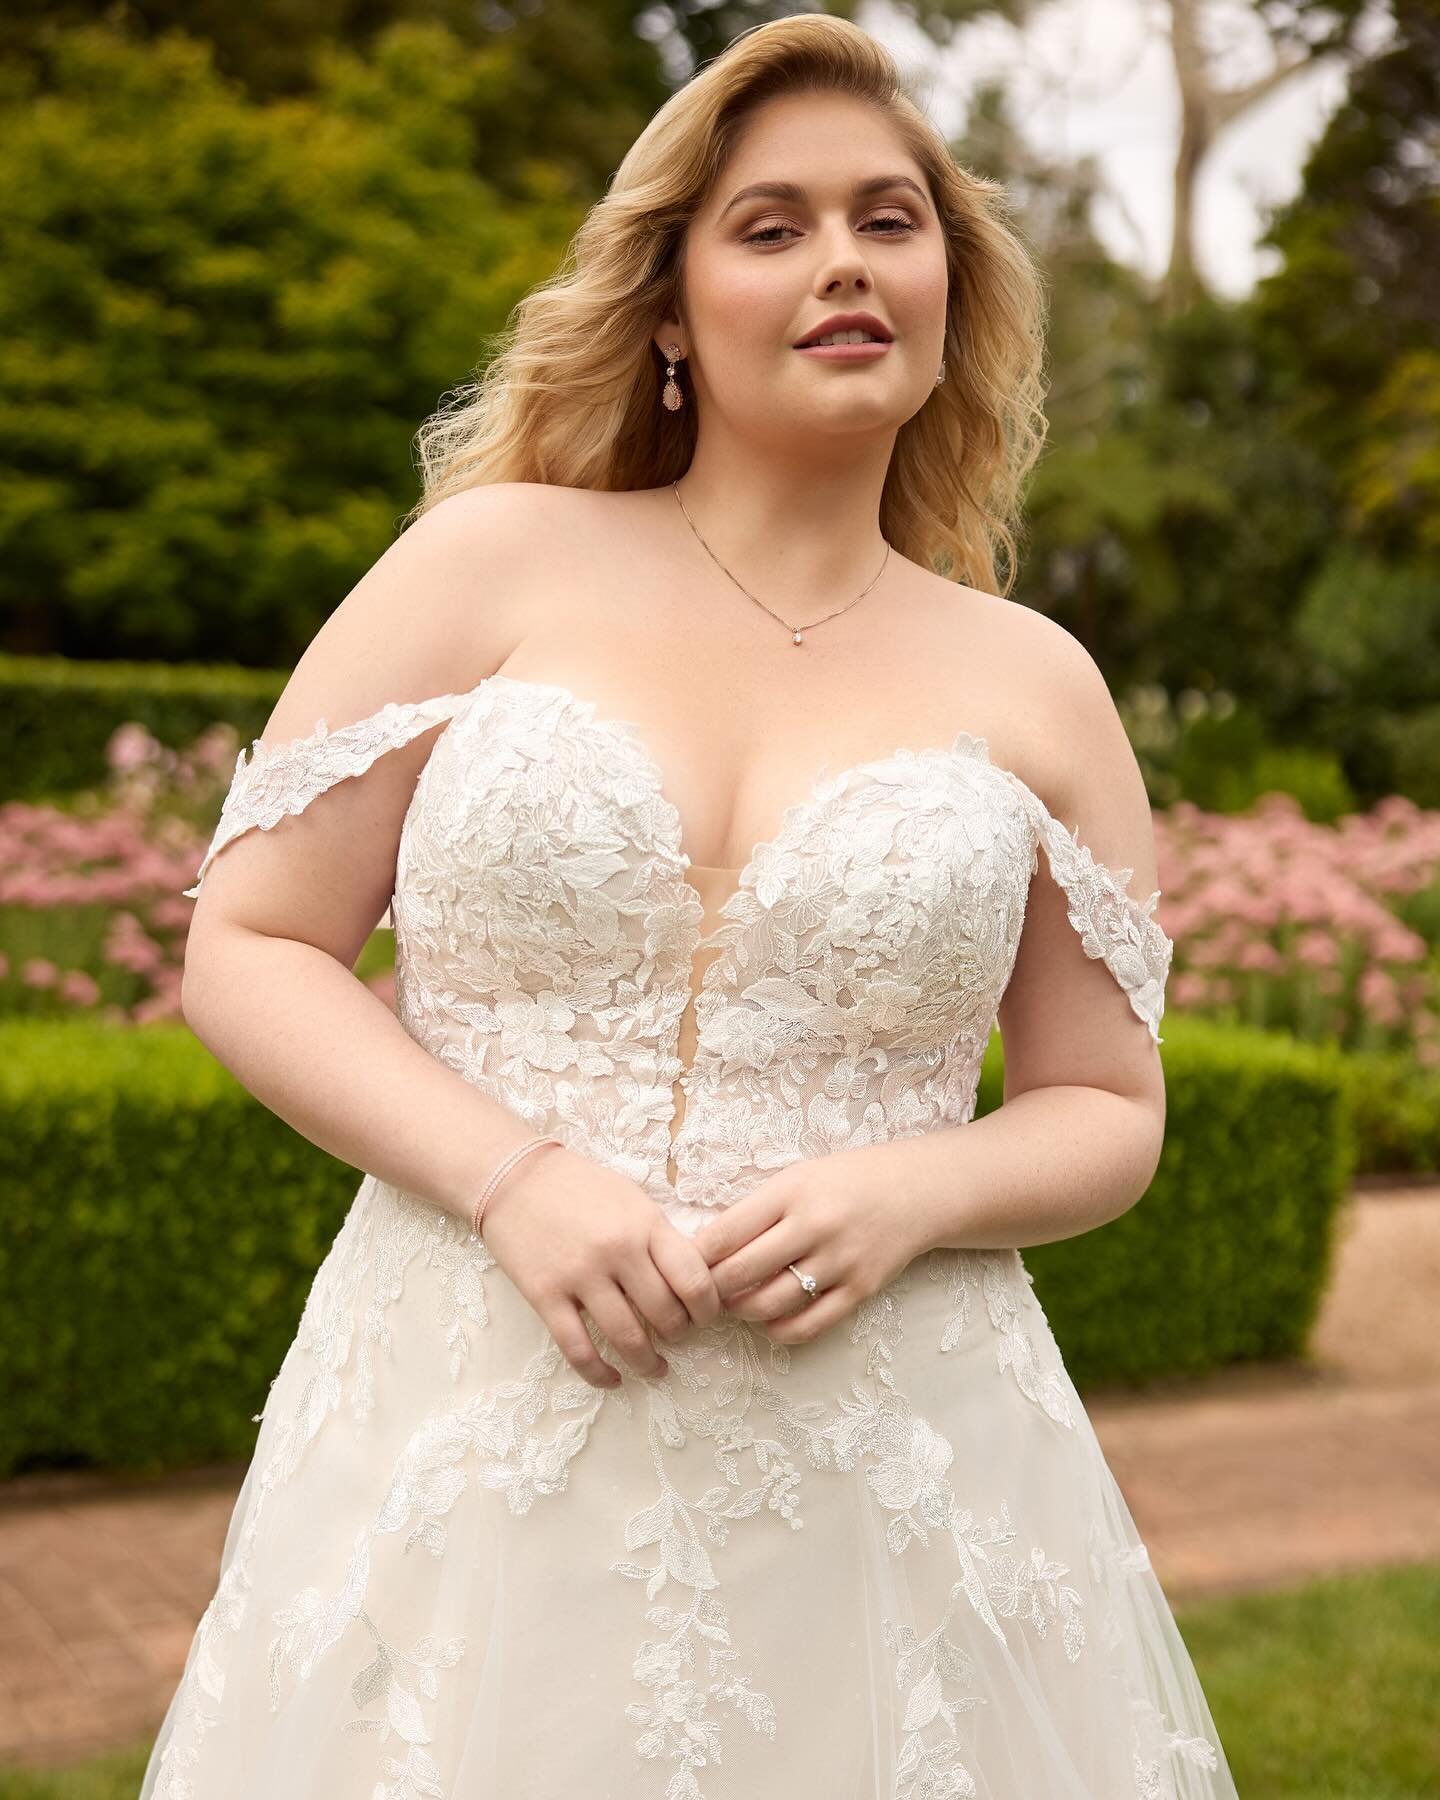 💕Enter into a romantic, floral fantasy with Sian. She is a flirtatious A-line wedding dress that epitomizes true romance. Sian&rsquo;s modern deep V-neck bodice is artfully decorated with floral sequined schiffli lace appliqu&eacute;s that elegantly